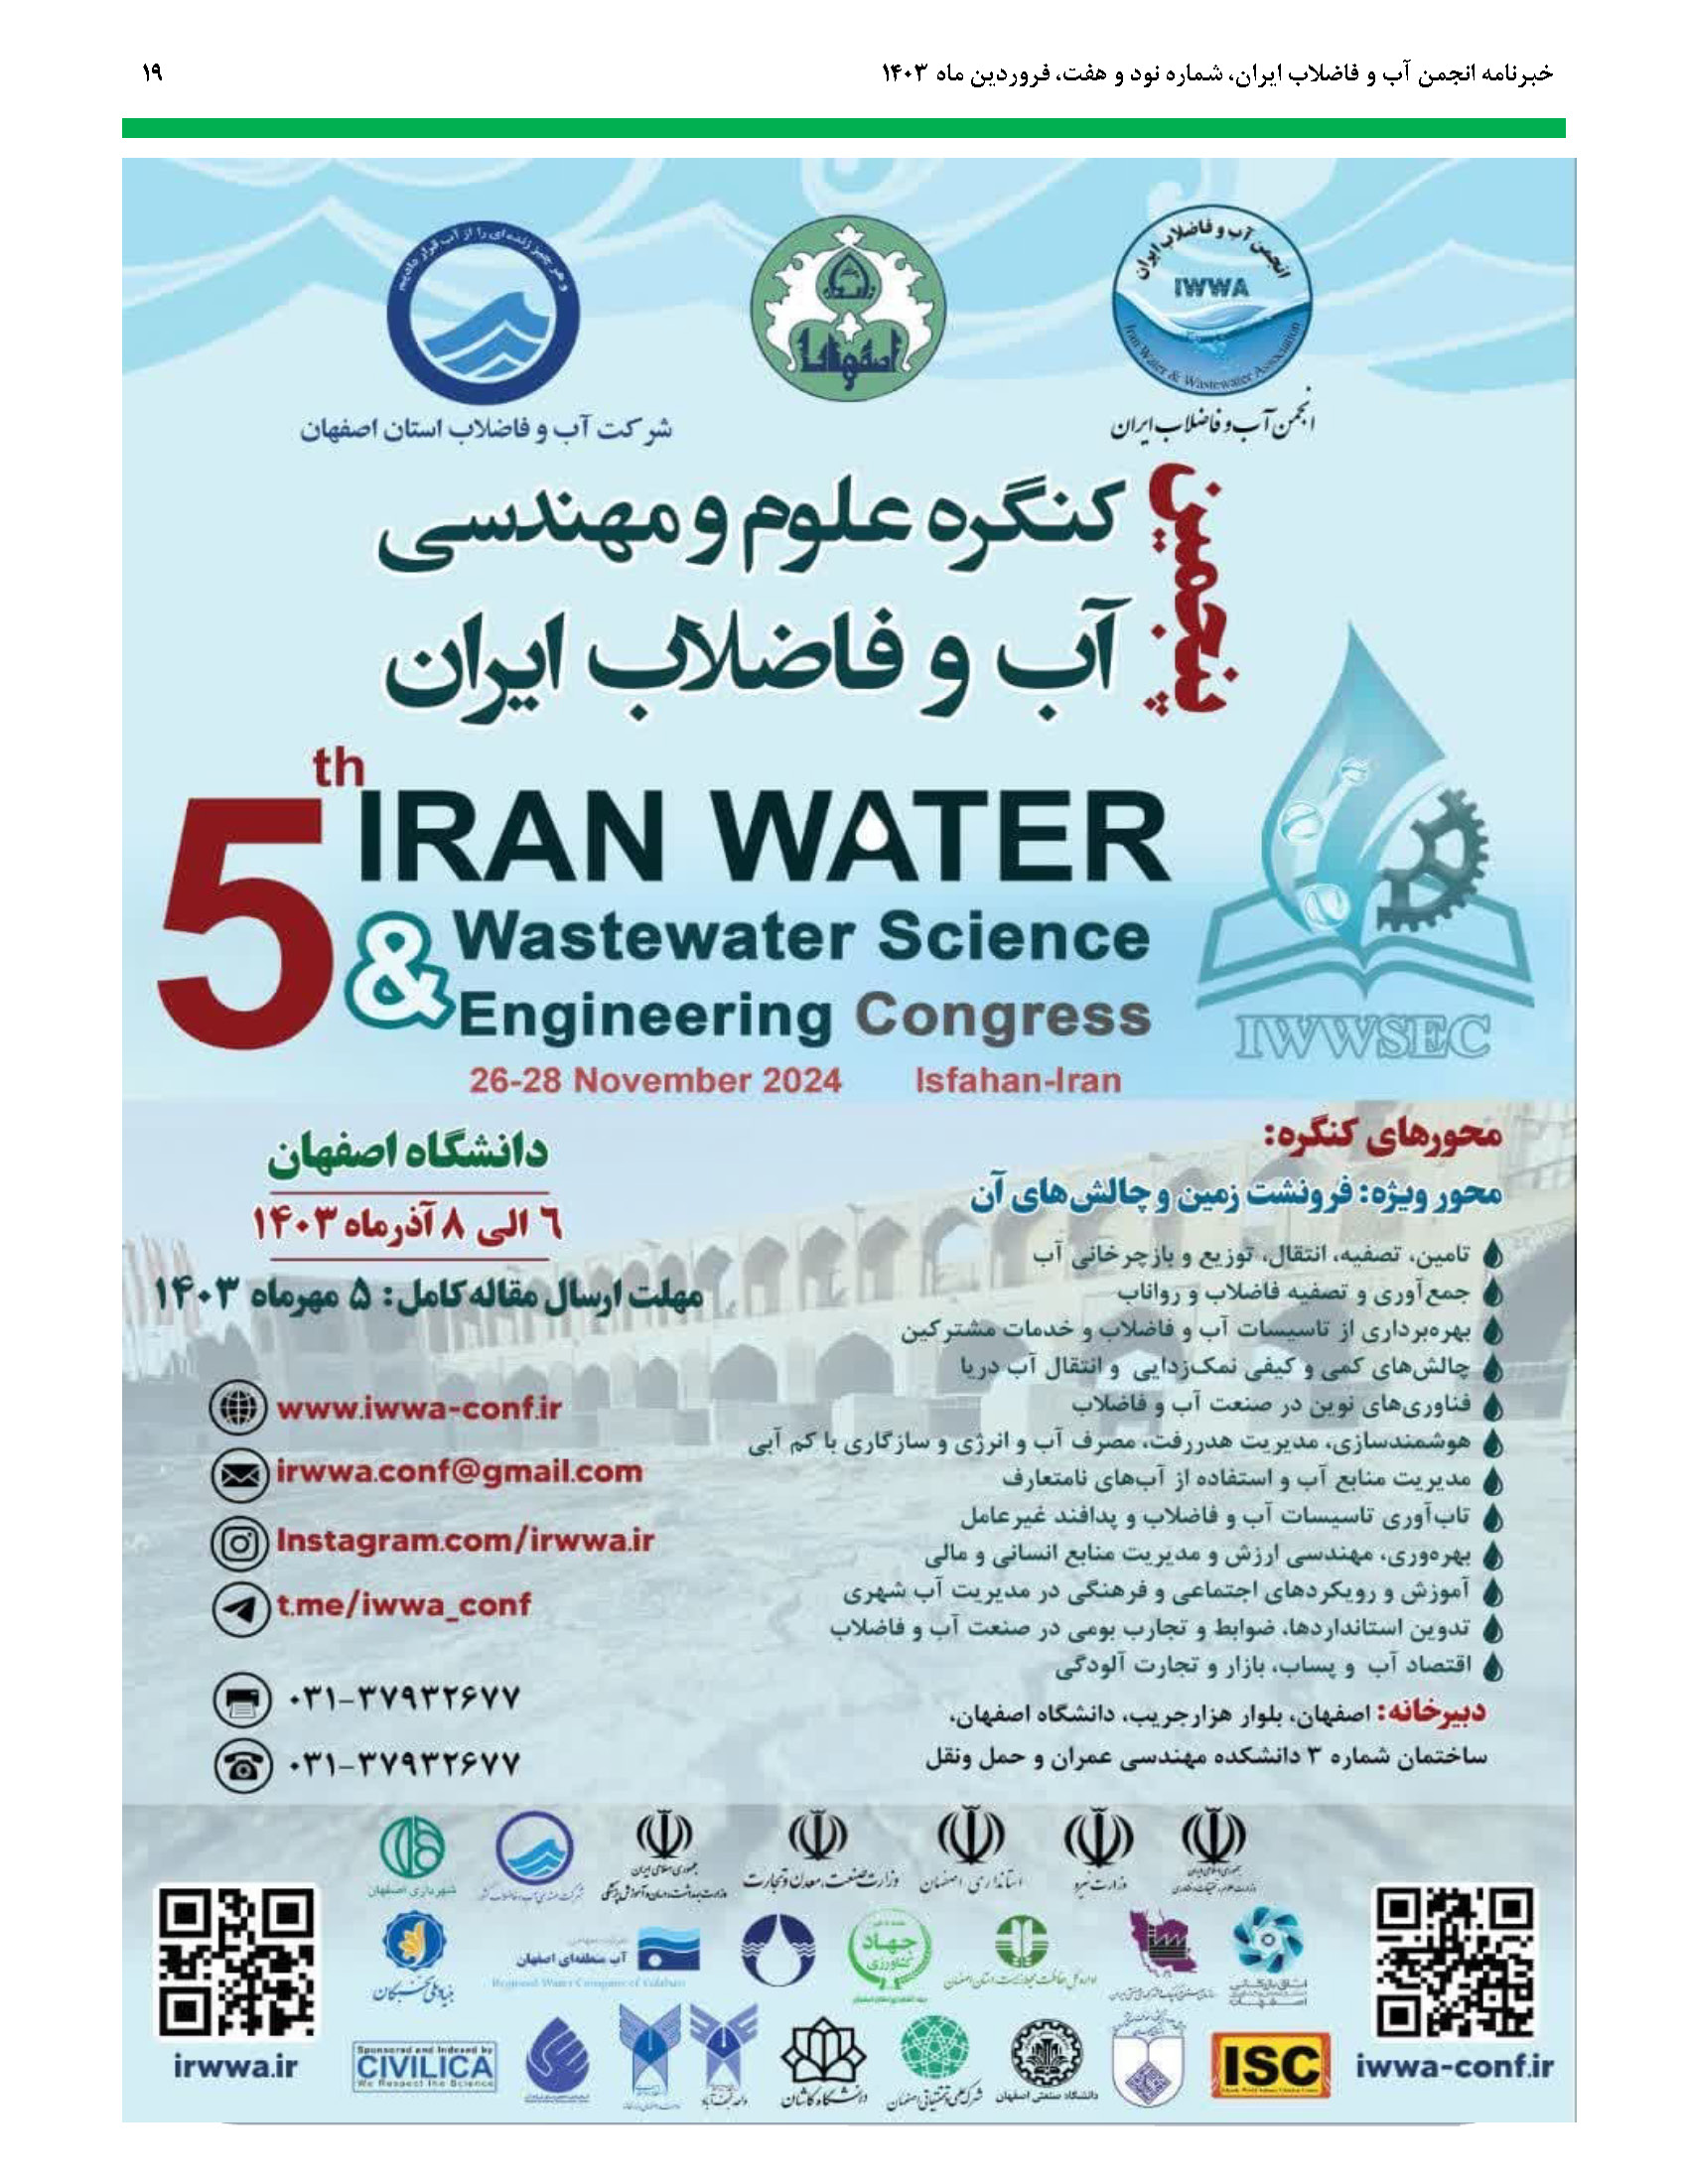 5th Iran Water & Wastewater Science & Engineering Congress